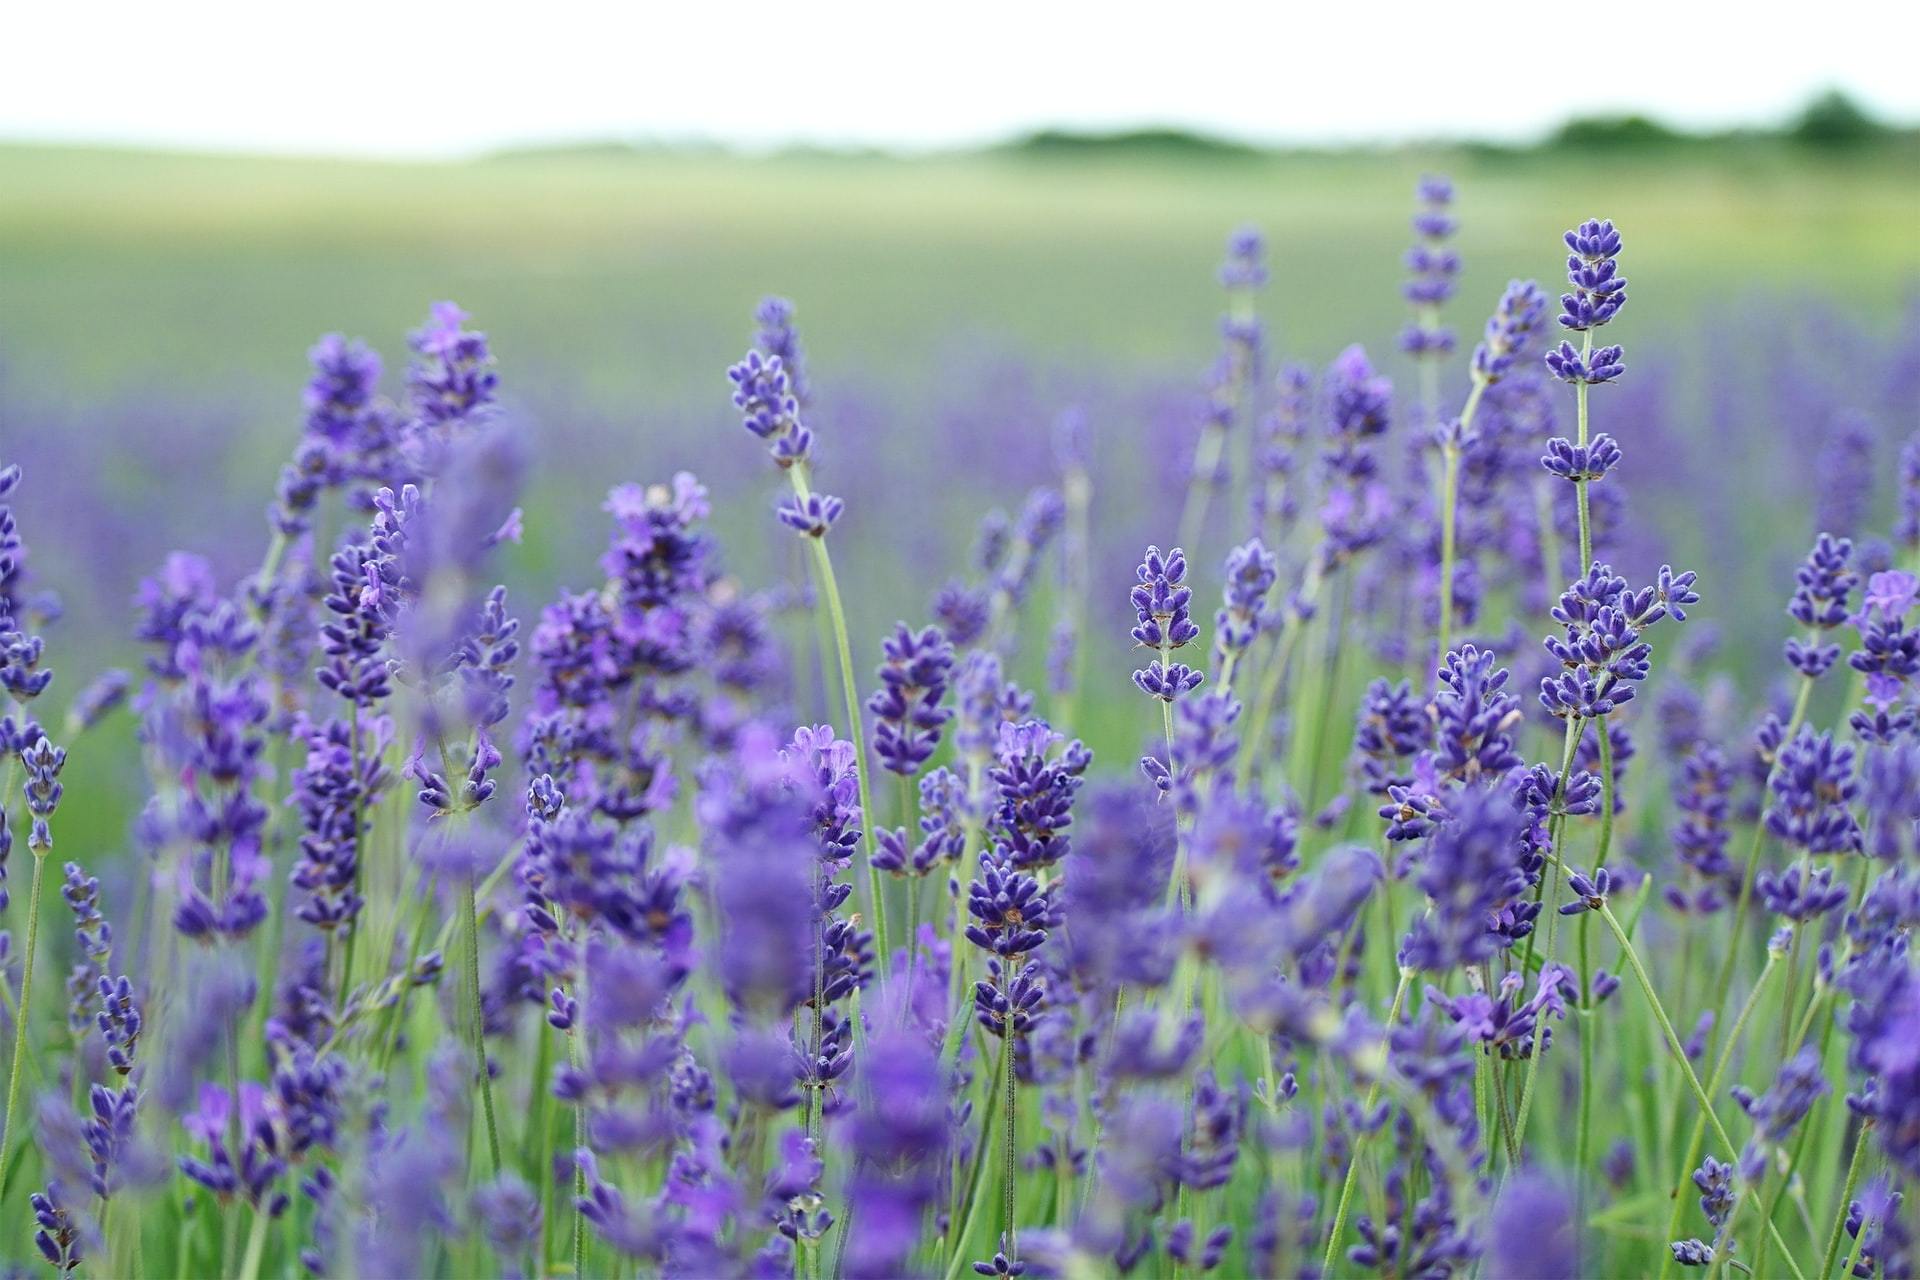 Lavender plants for natural products